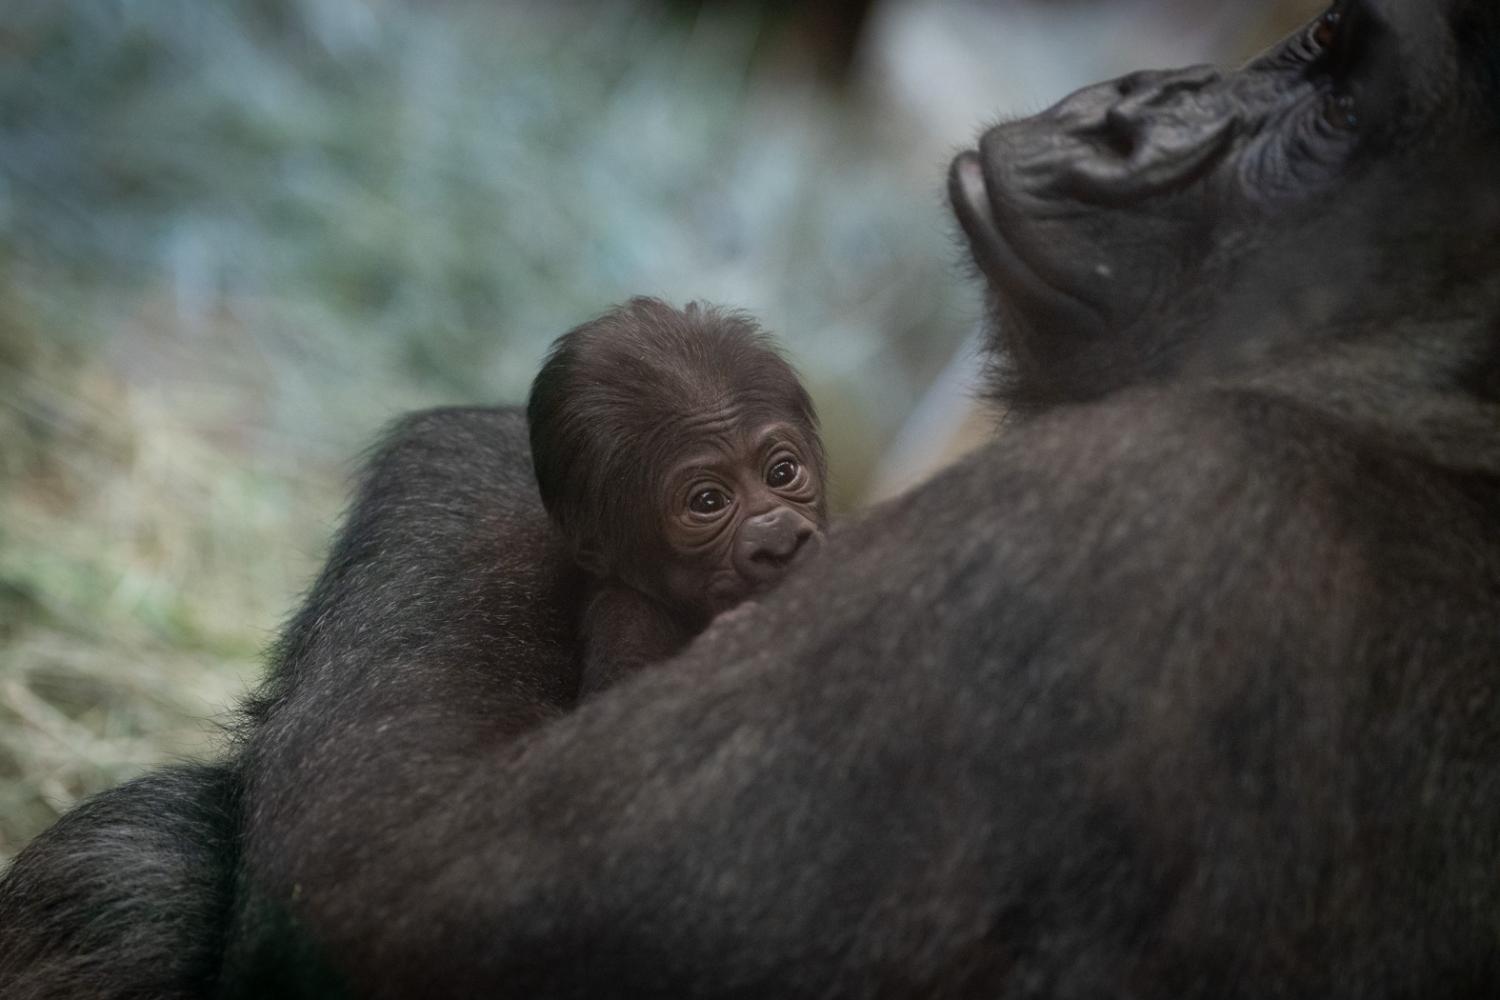 mother gorilla holding baby